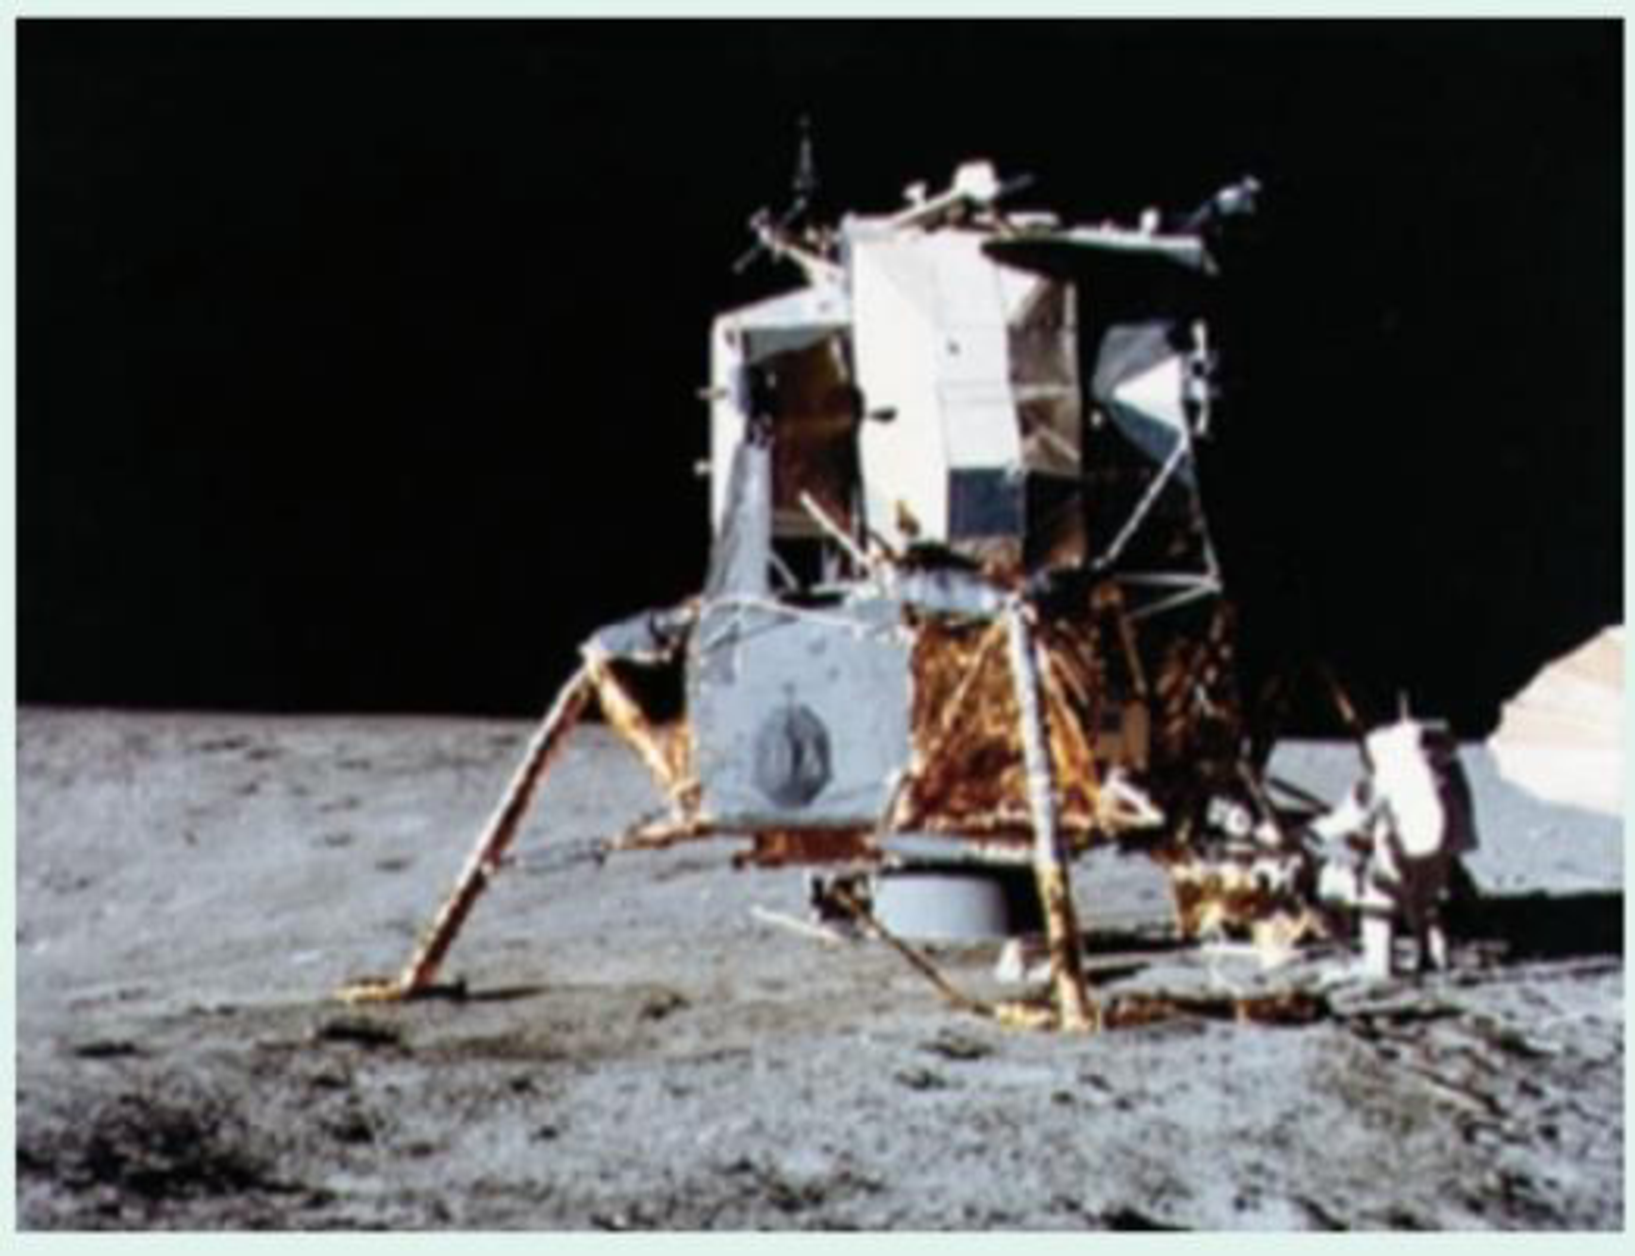 Chapter 21, Problem 3LTL, In the photo shown here, astronaut Alan Bean works at the Apollo 12 lander. Describe the horizon and 